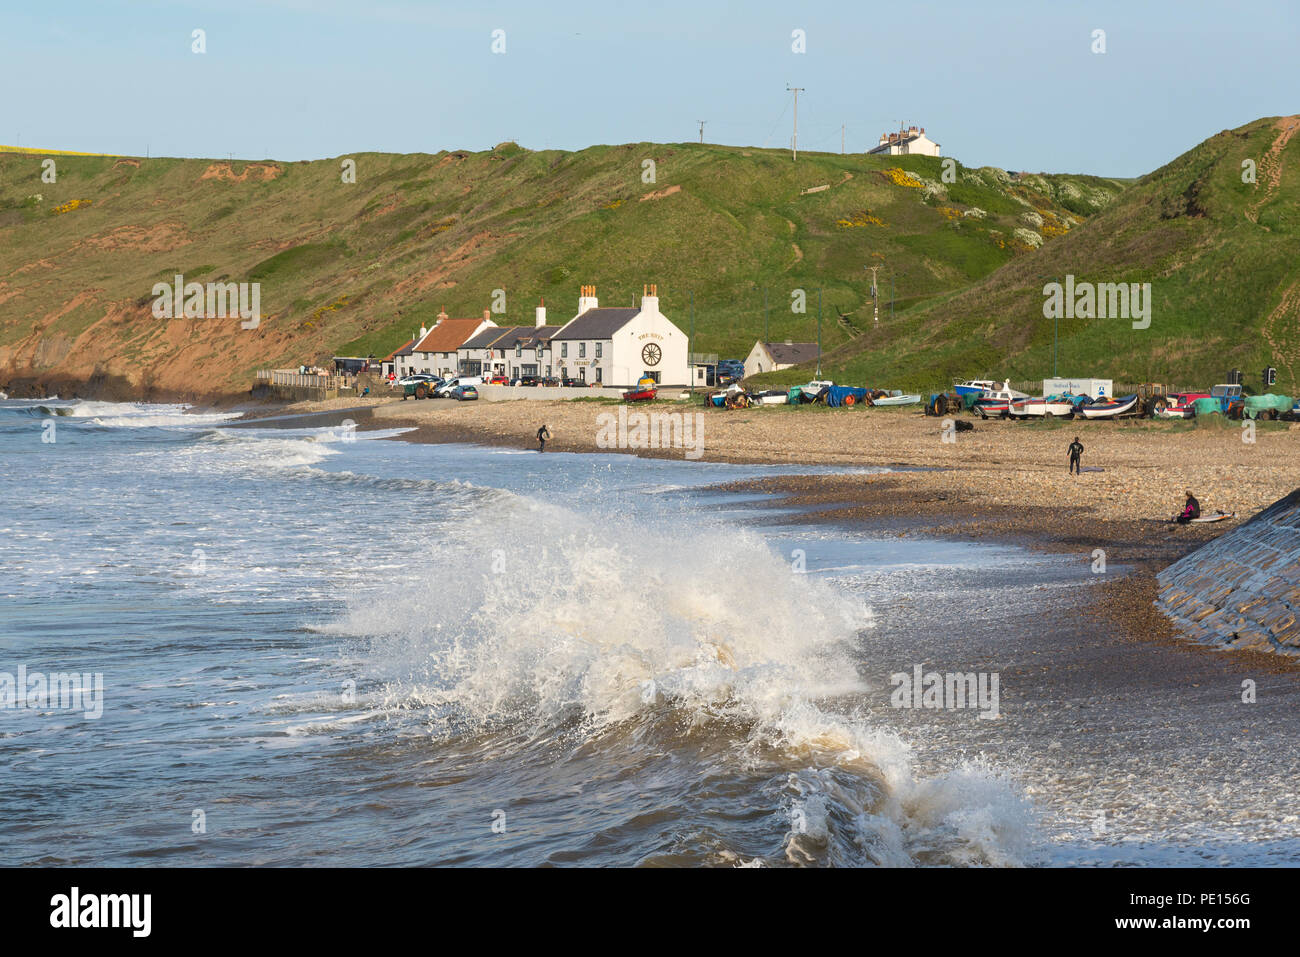 Large waves breaking on the beach at Saltburn-by-the-sea on the coast of North Yorkshire, England. A lovely spring afternoon. Stock Photo